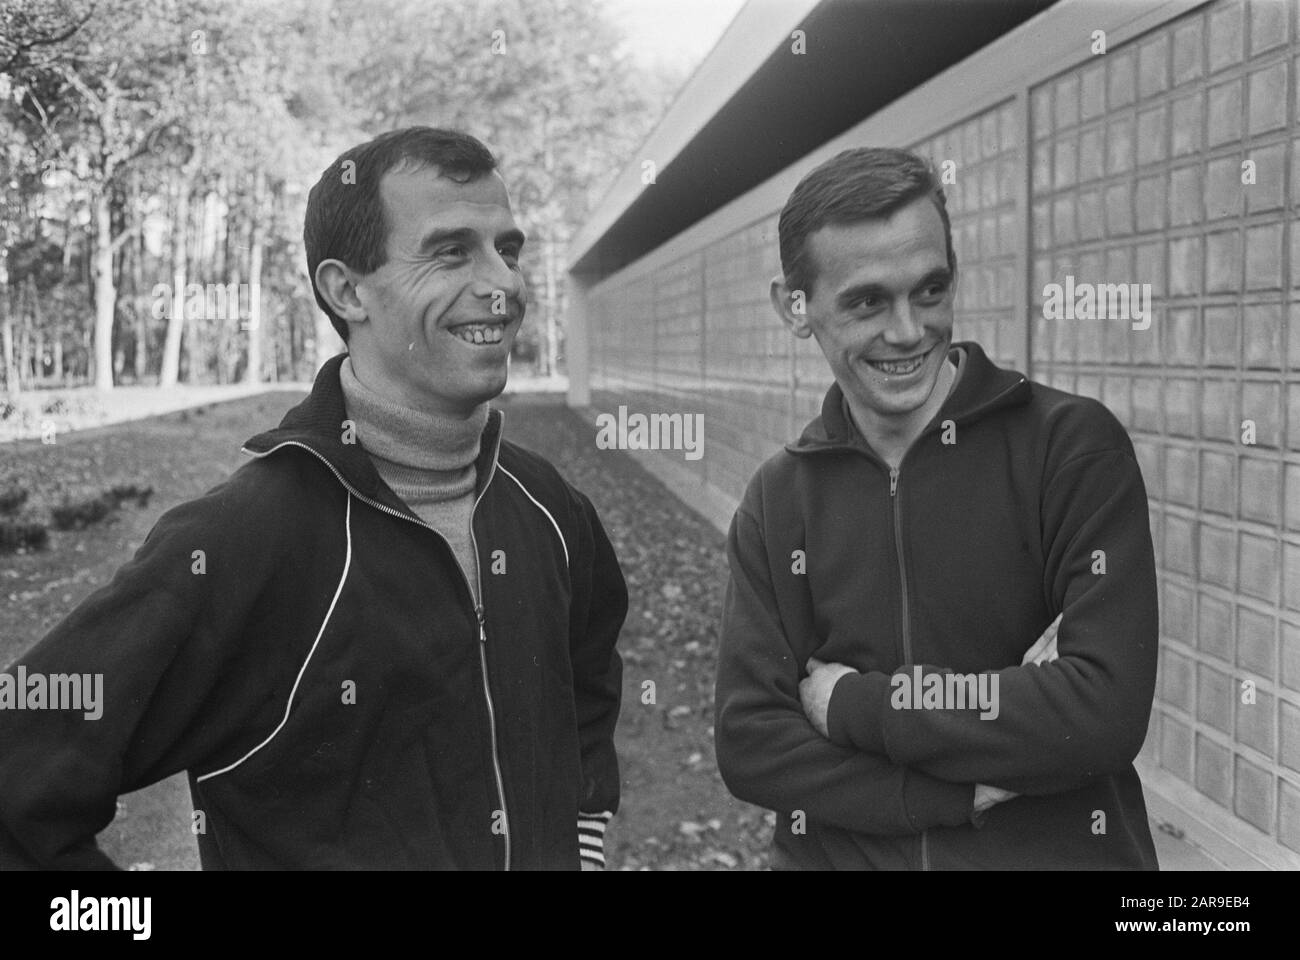 Training of the Dutch national team  Footballer Coen Moulijn (l.) with the newcomer Miel Pijs (r.) of PSV Date: November 3, 1965 Keywords: sport, football Personal name: Moulijn, Coen, Pijs, Miel Stock Photo